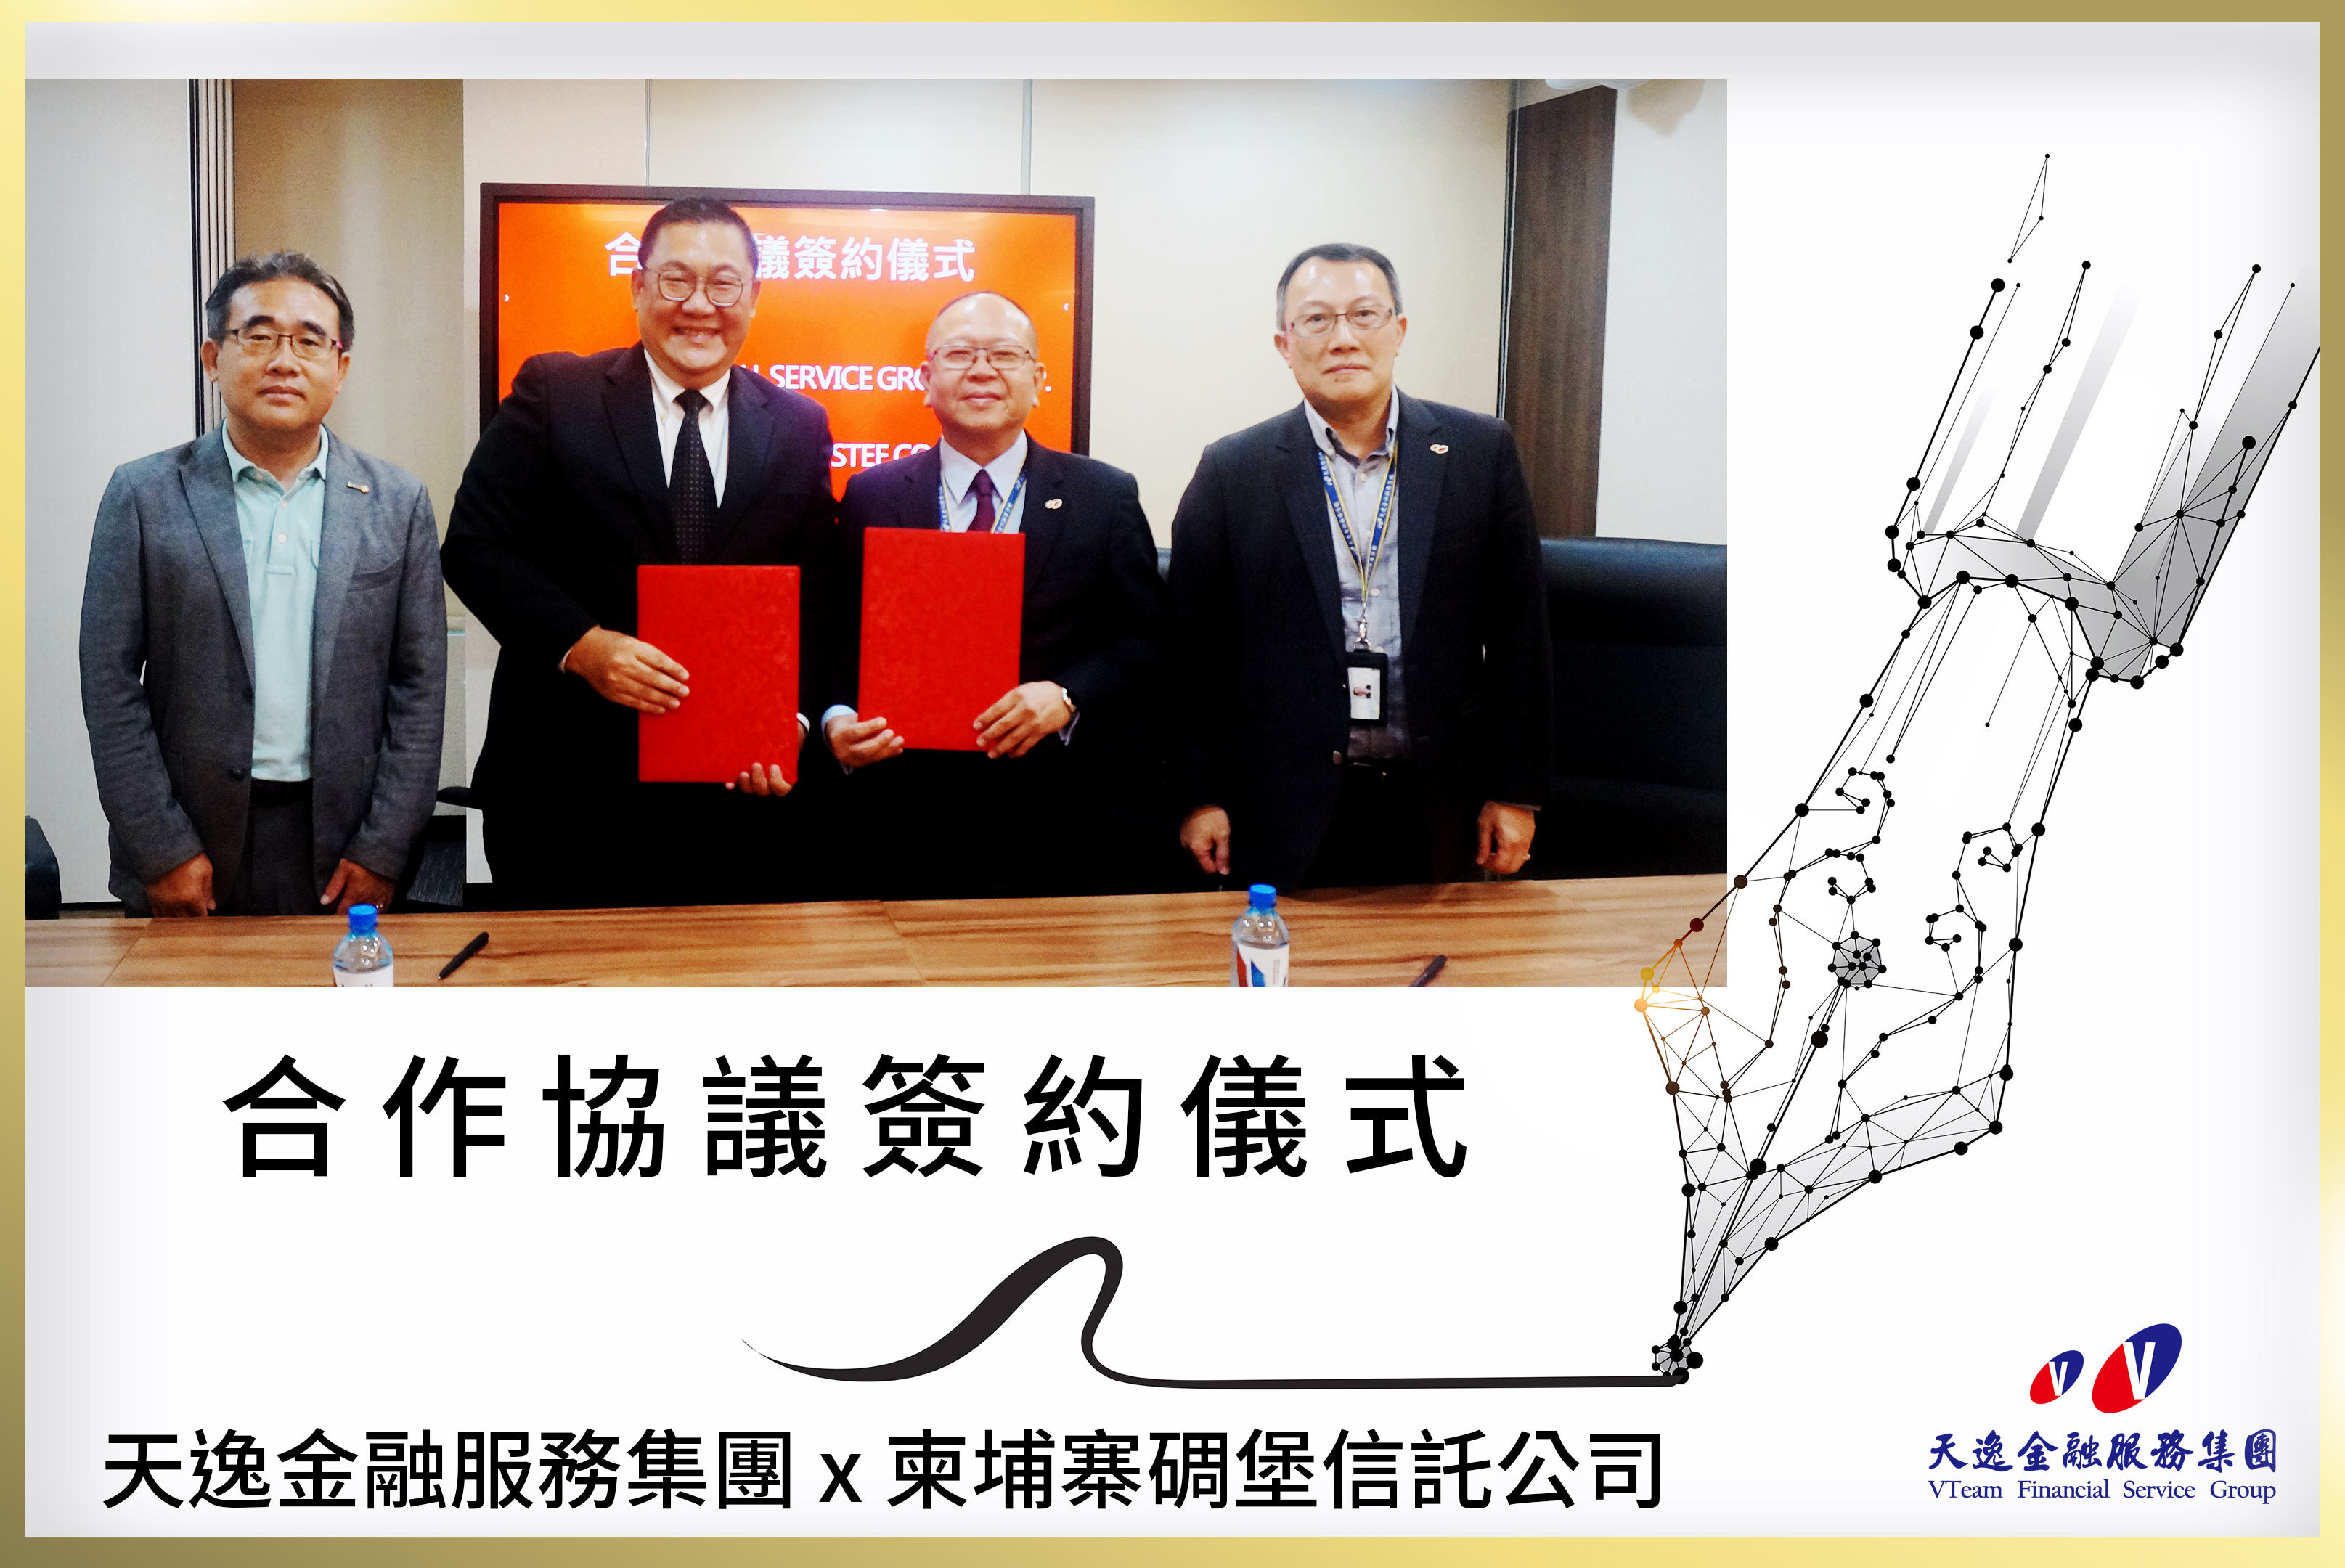 Congratulations! VTeam Financial Service Group Signed A Cooperation Agreement With The STRONGHOLD TRUSTEE CO.,LTD. to Cooperate Jointly for Innovation and Development